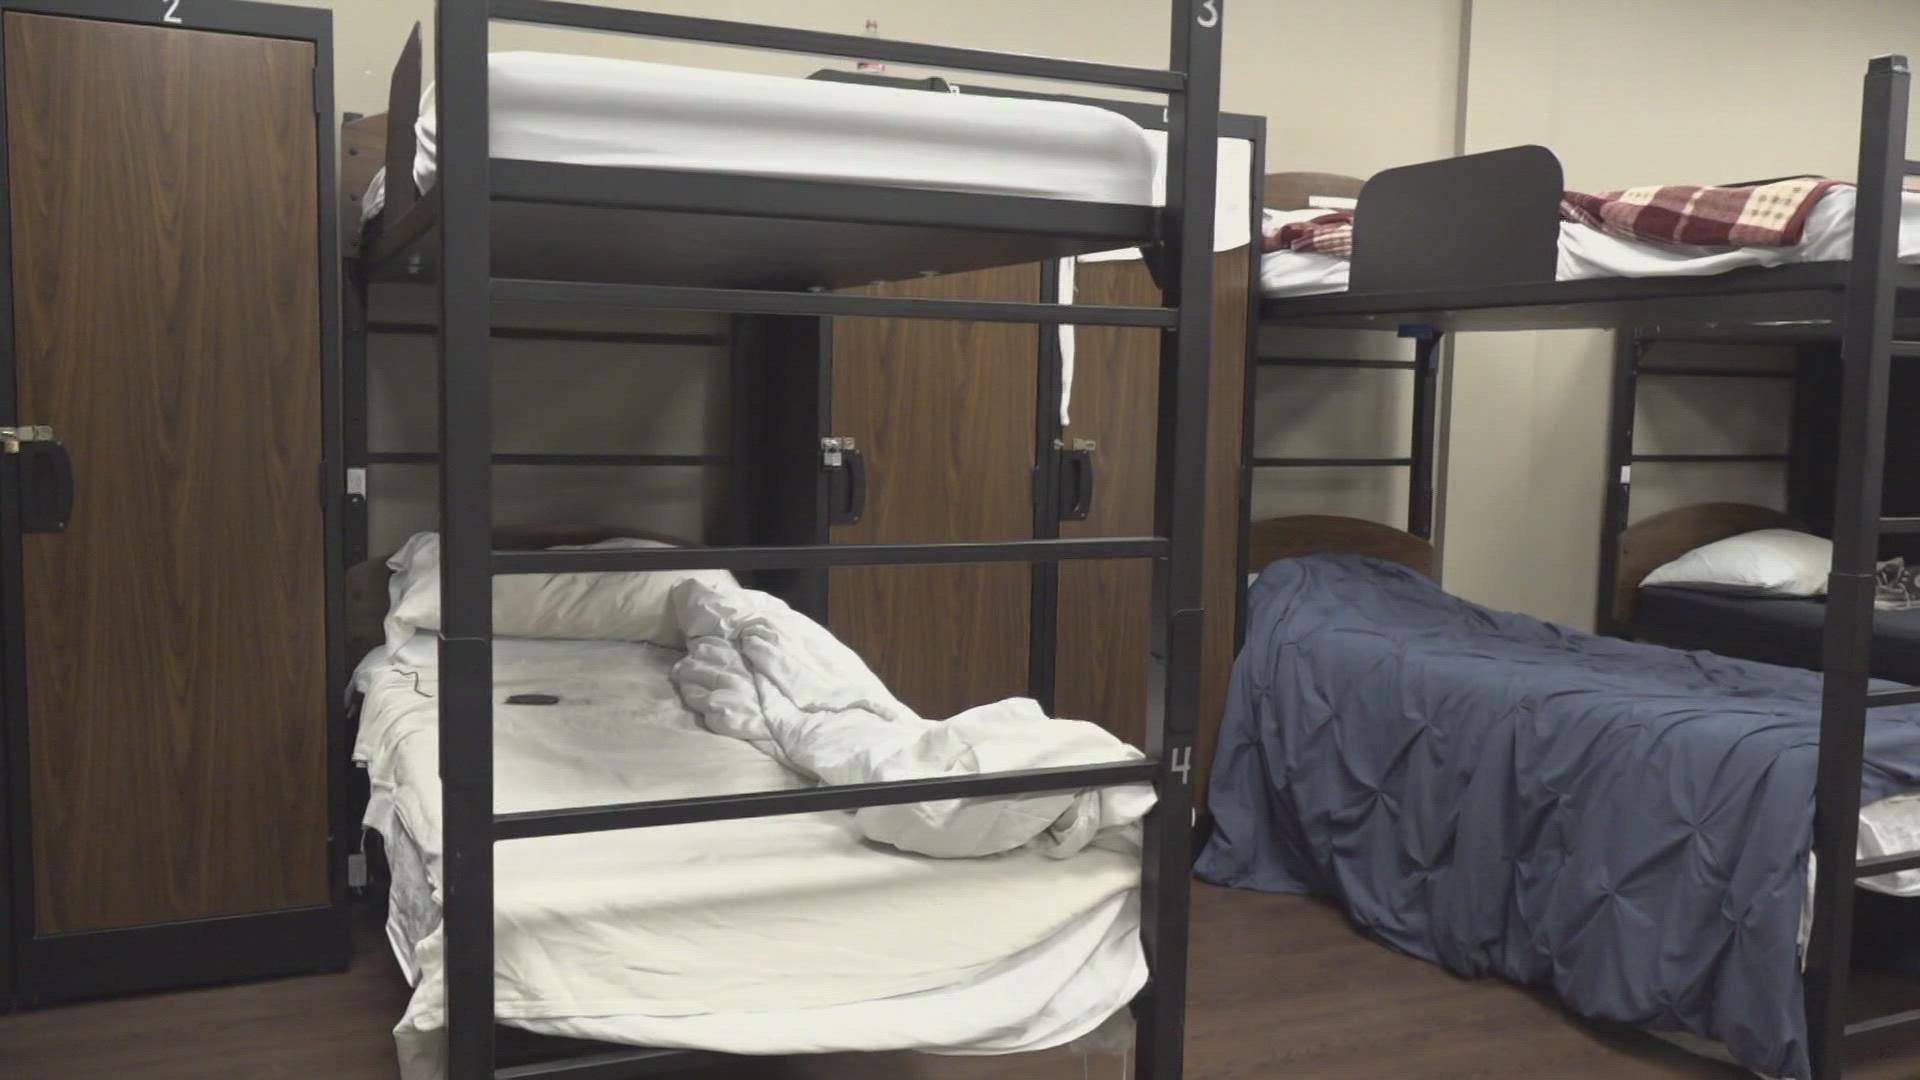 The Midland Salvation Army warming shelter will be open for the community.